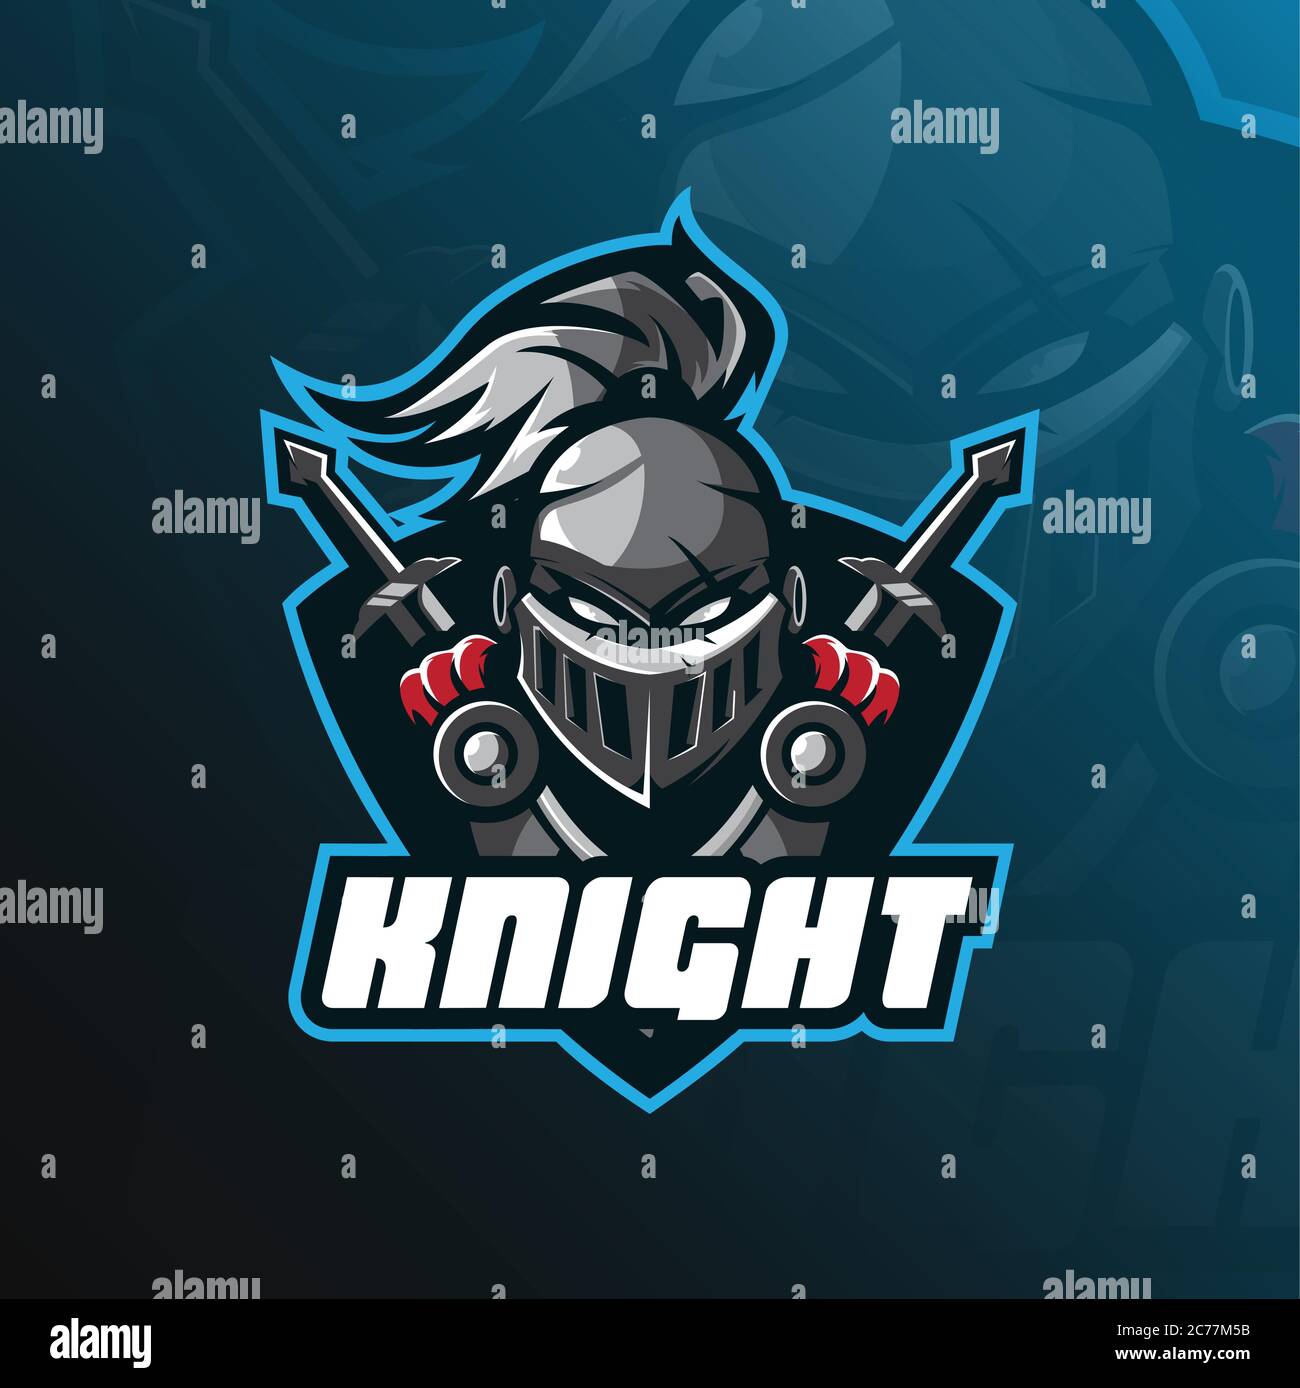 knight mascot logo vector design with modern illustration concept style for badge, emblem and t shirt printing. head knight illustration with shield. Stock Vector